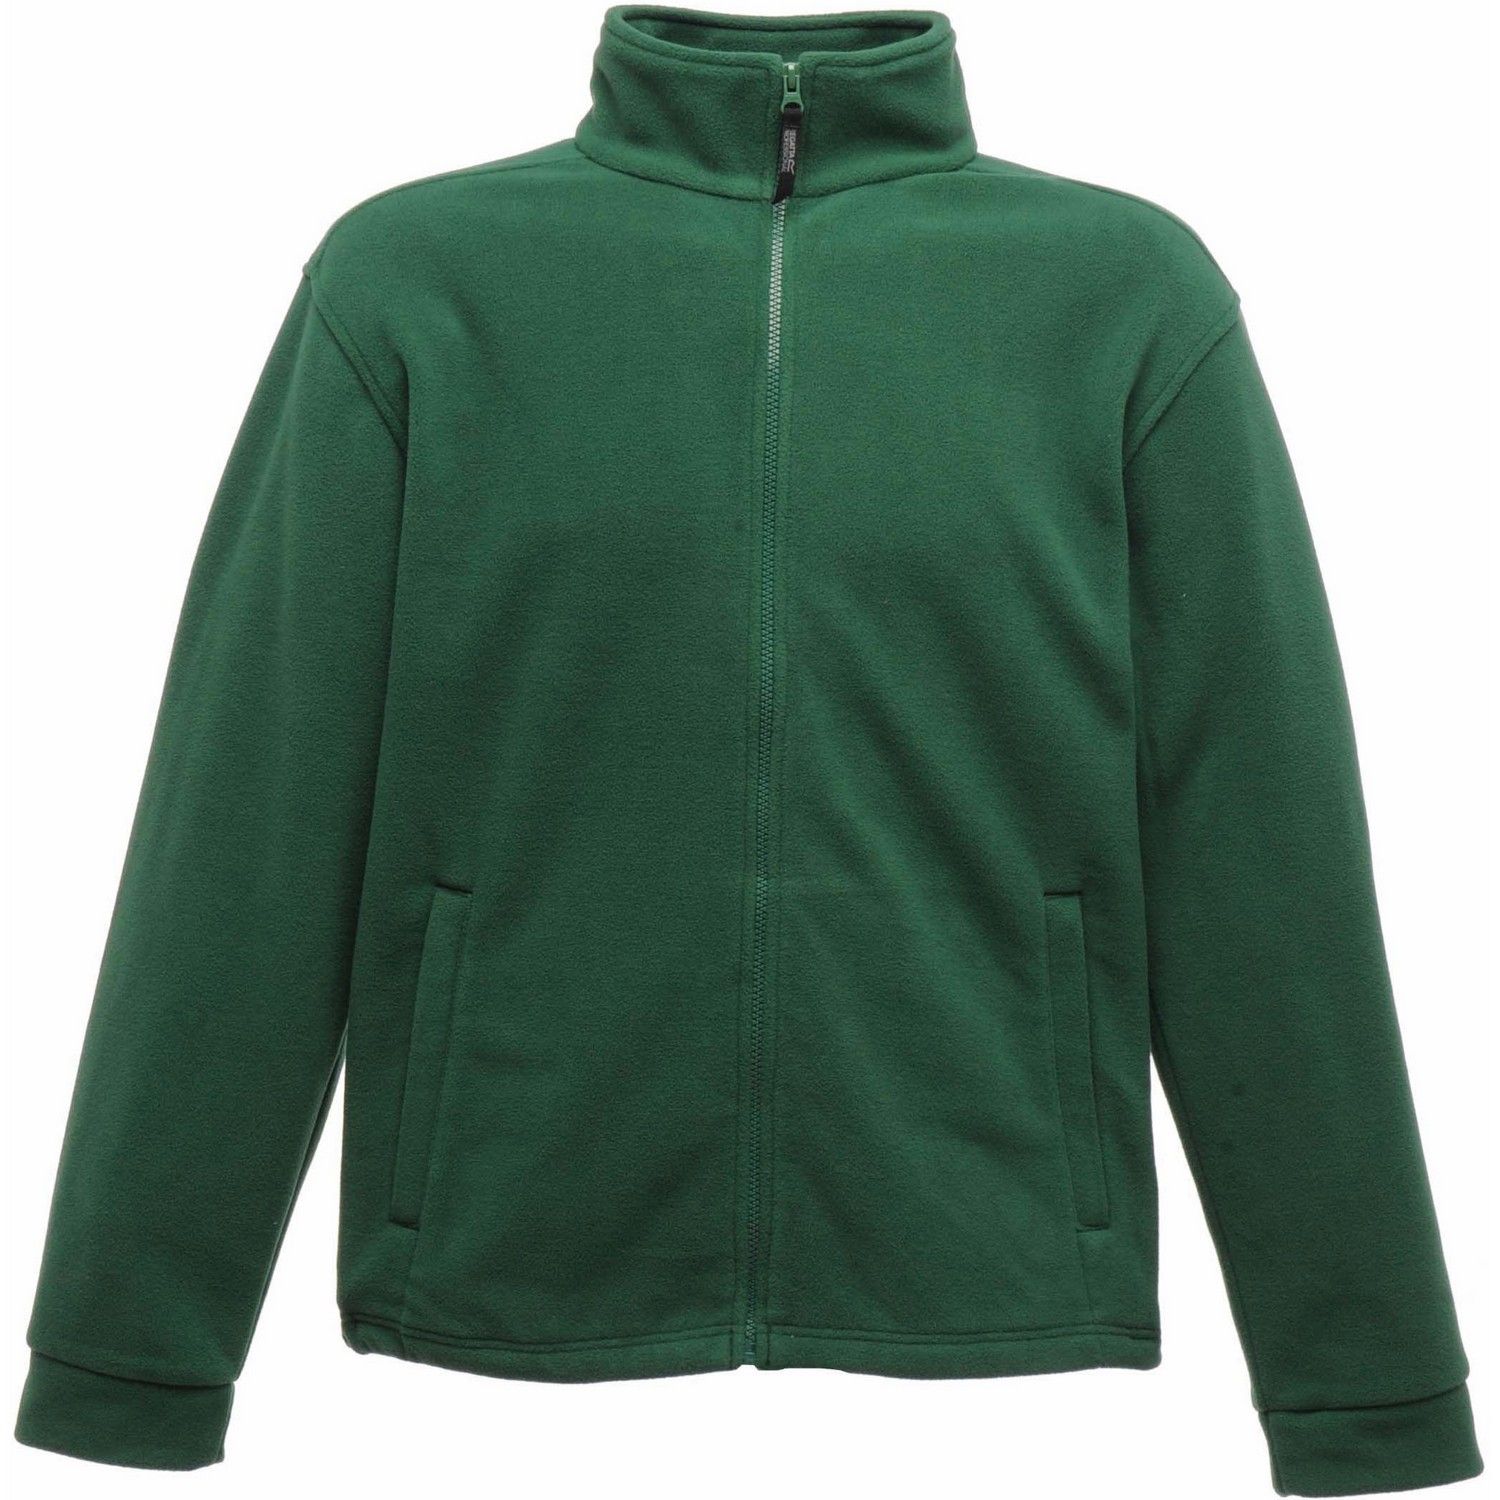 250 Series symmetry fleece. 1 Side brushed, 1 side anti pill. 2 Lower zipped pockets. Adjustable shock cord hem. Fabric: 100% Polyester. Weight: 250gsm. Regatta Mens sizing (chest approx): XS (35-36in/89-91.5cm), S (37-38in/94-96.5cm), M (39-40in/99-101.5cm), L (41-42in/104-106.5cm), XL (43-44in/109-112cm), XXL (46-48in/117-122cm), XXXL (49-51in/124.5-129.5cm), XXXXL (52-54in/132-137cm), XXXXXL (55-57in/140-145cm).